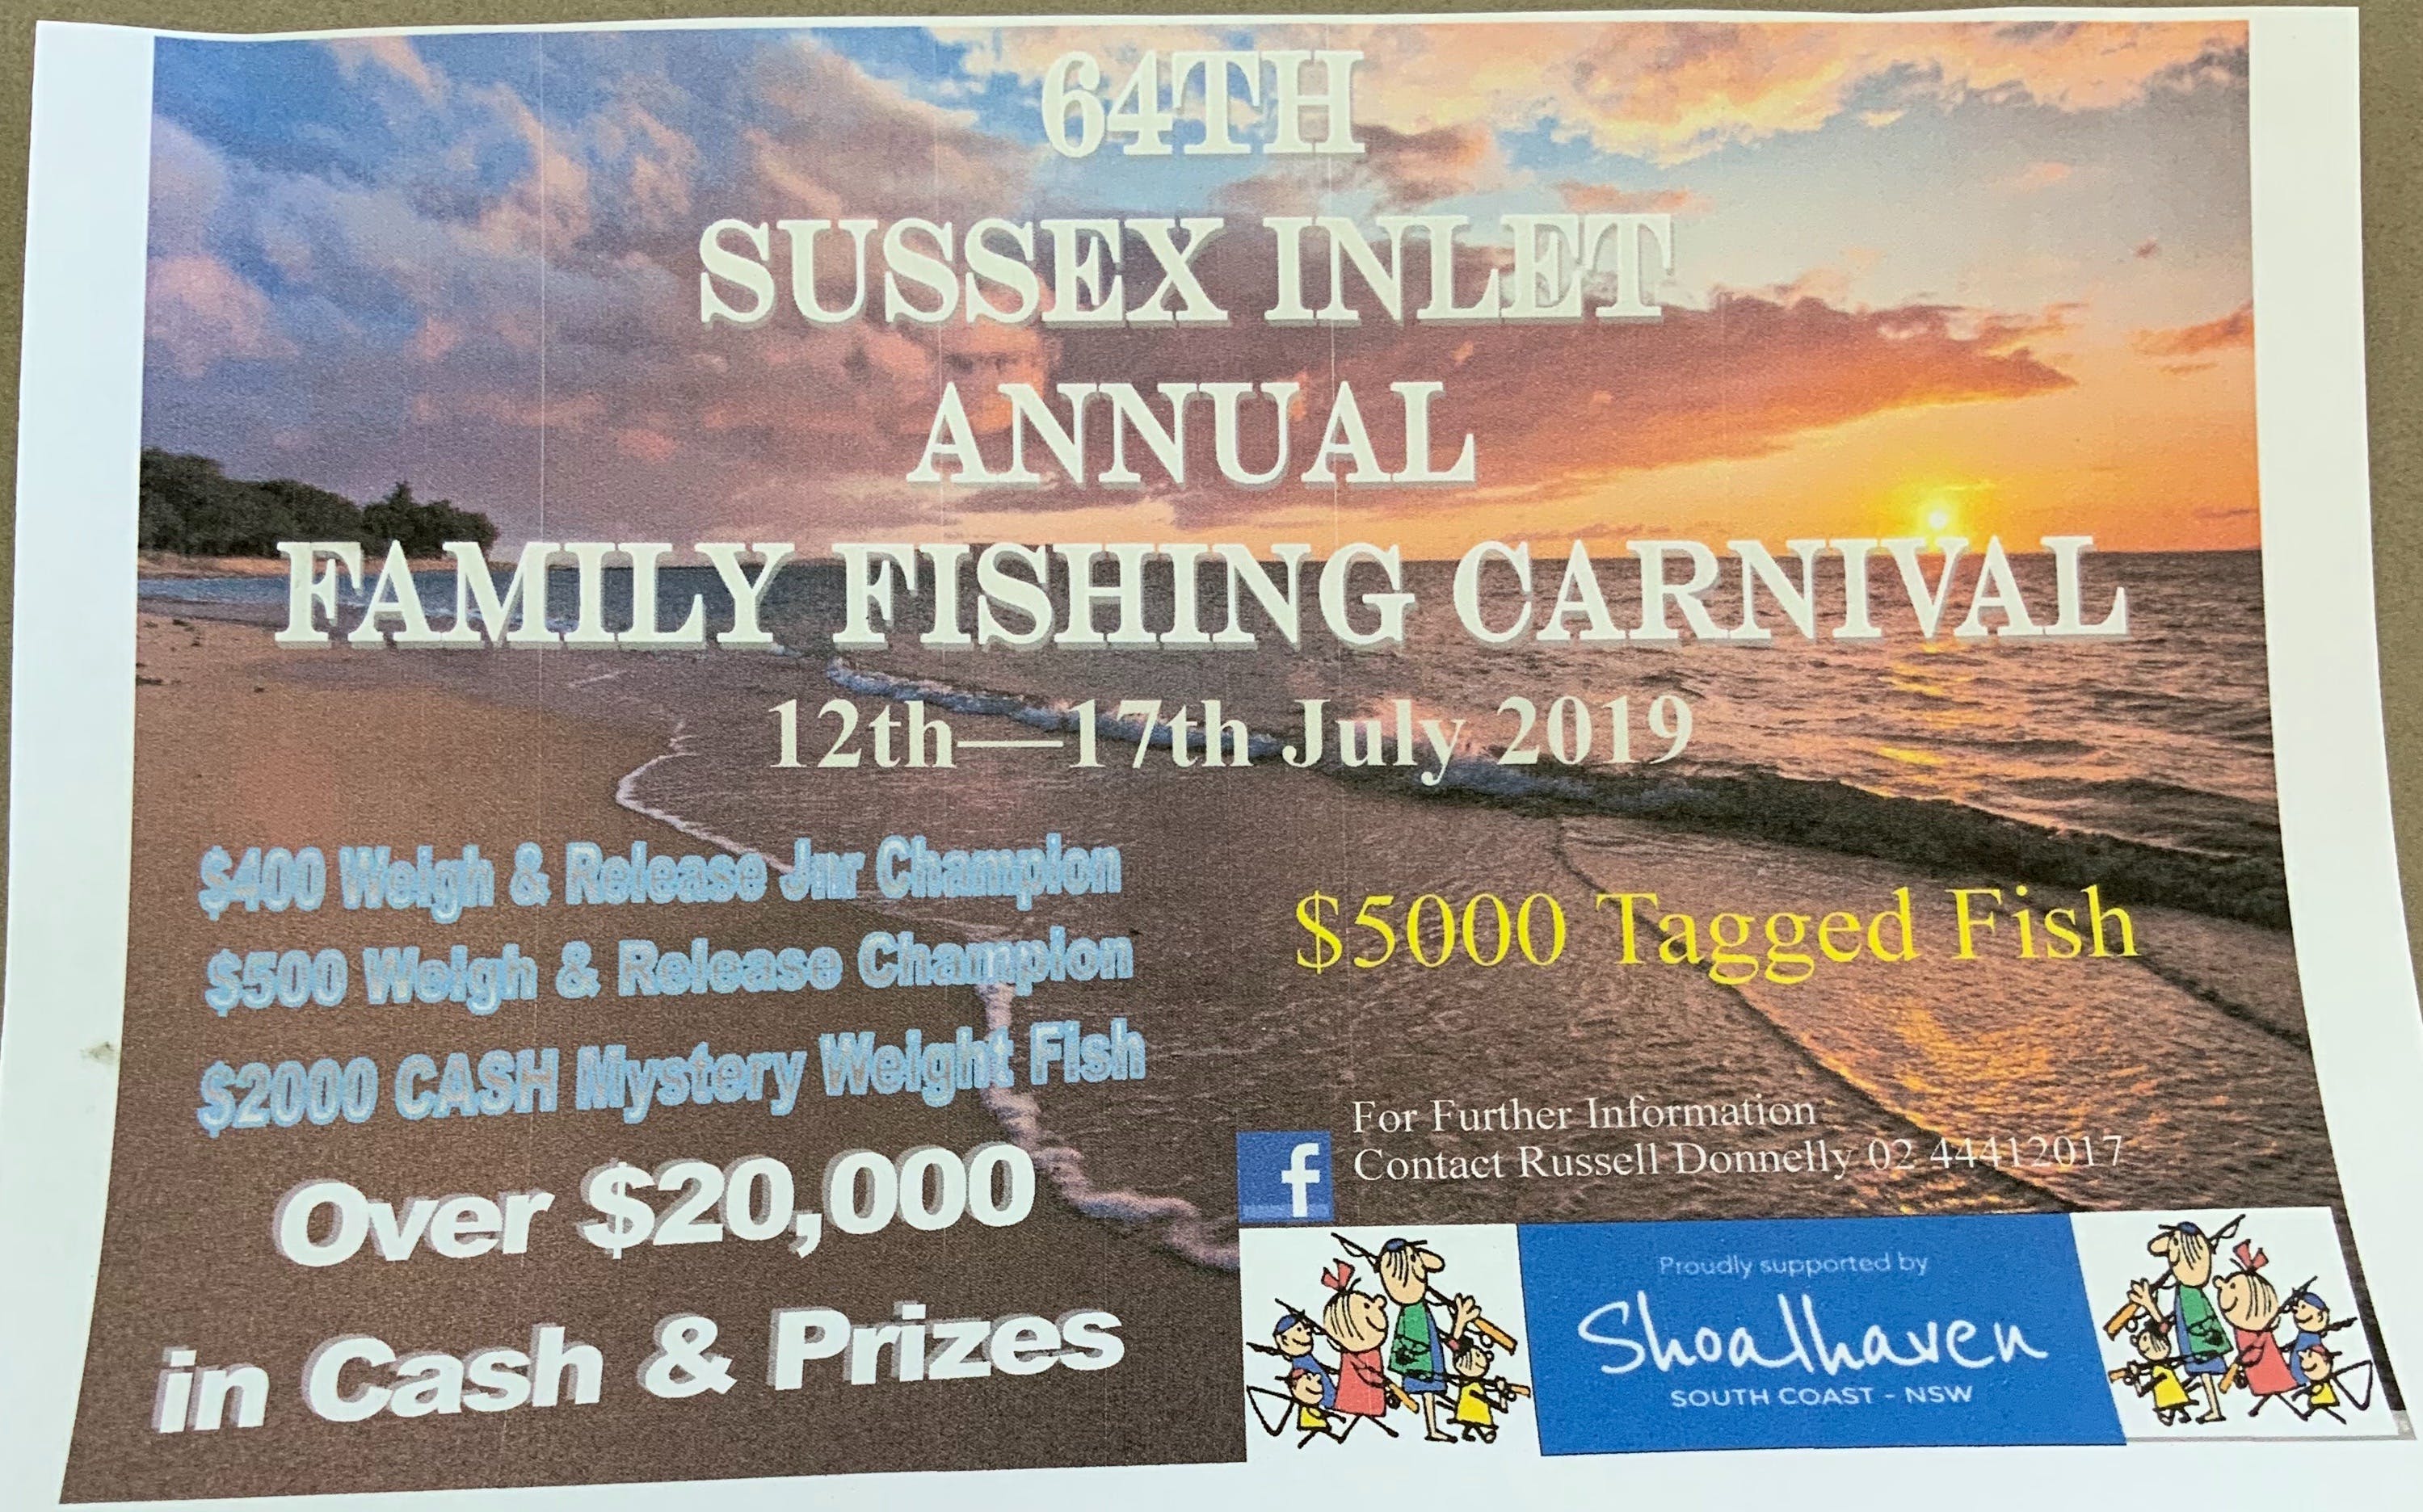 The Sussex Inlet Annual Family Fishing Carnival - Pubs Sydney